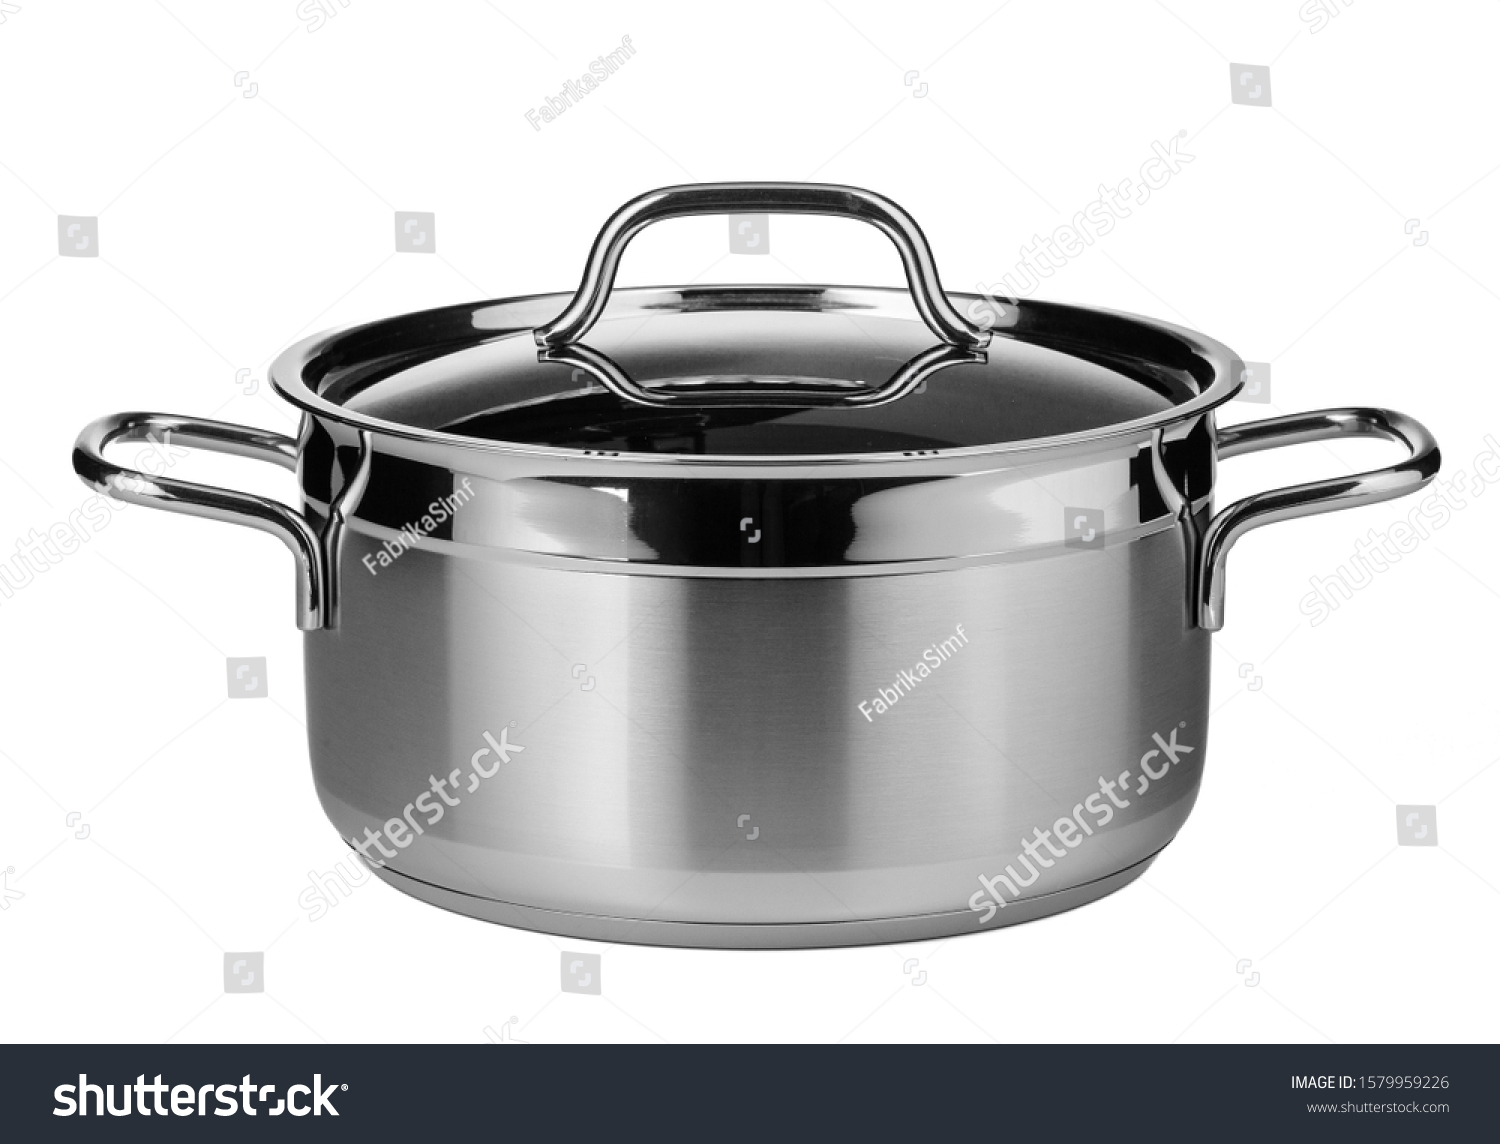 Stainless steel pot isolated on white background #1579959226